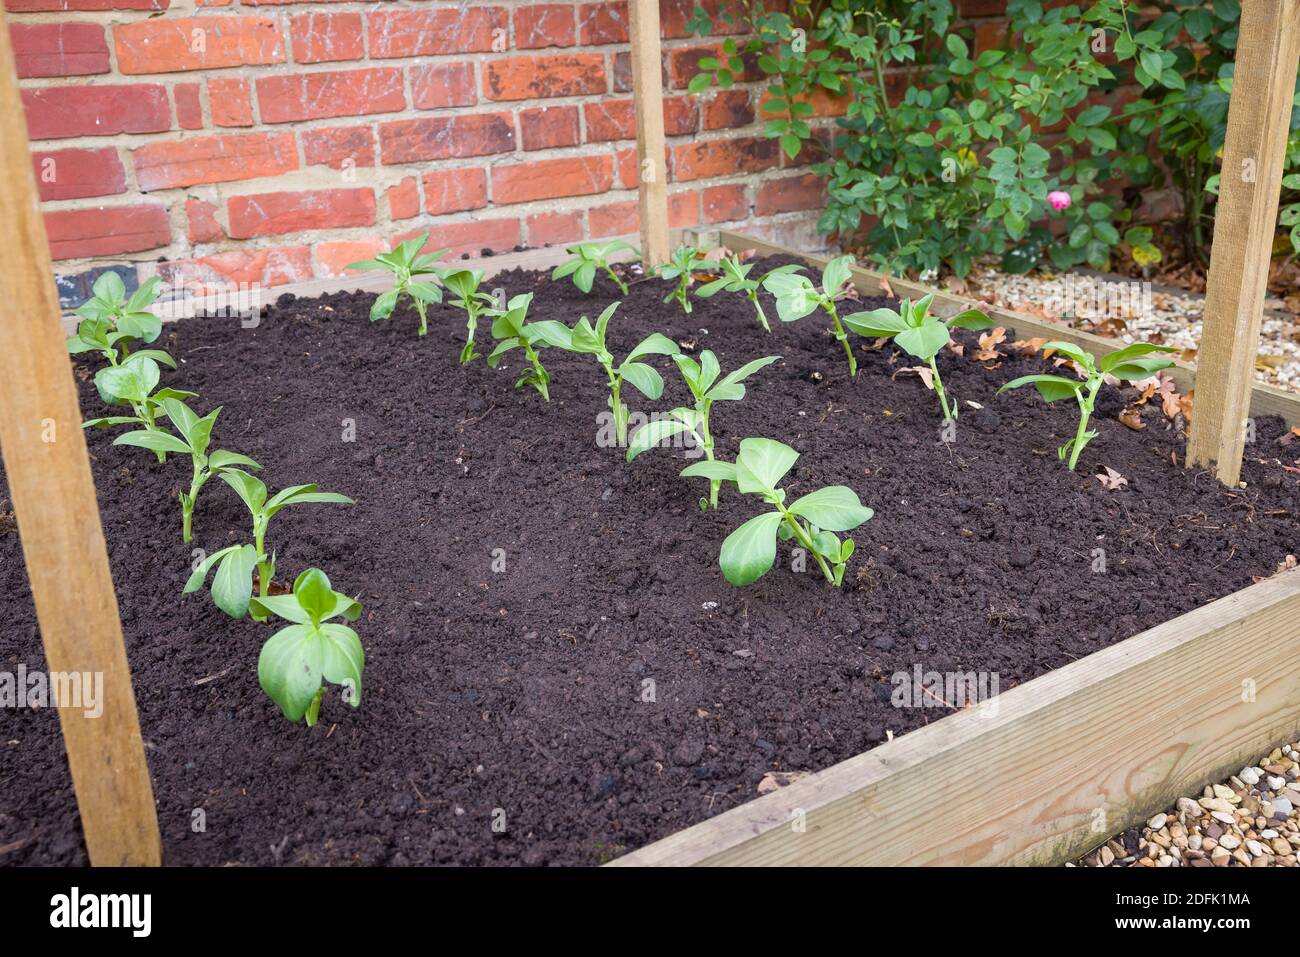 Young broad bean (fava bean) plants growing in a raised vegetable bed in a garden in England, UK Stock Photo